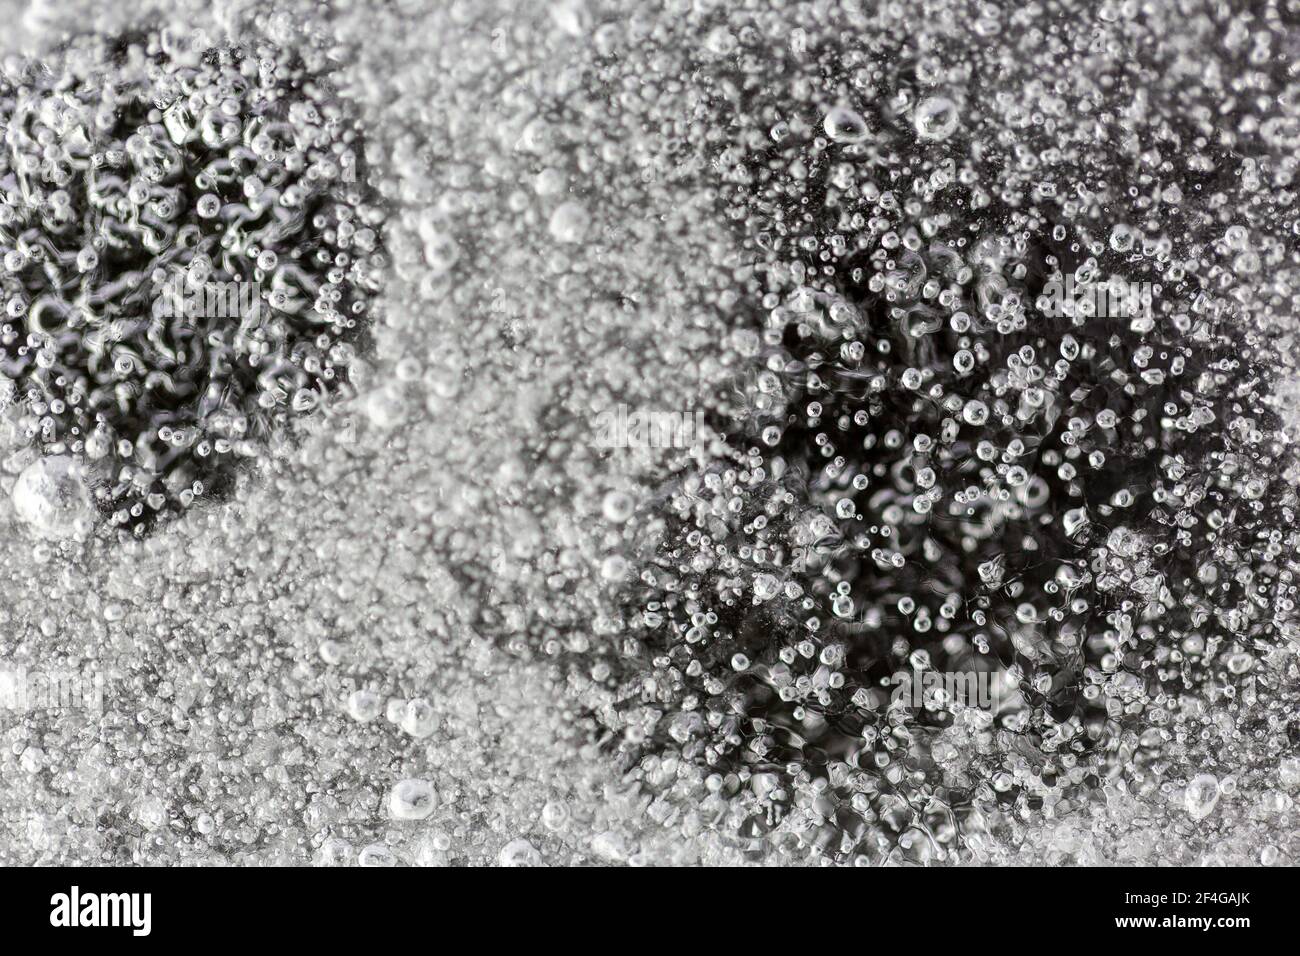 Macro shot of tiny air bubbles trapped in a sheet of ice in the garden, shot with a flash strobe light to illuminate the ice Stock Photo